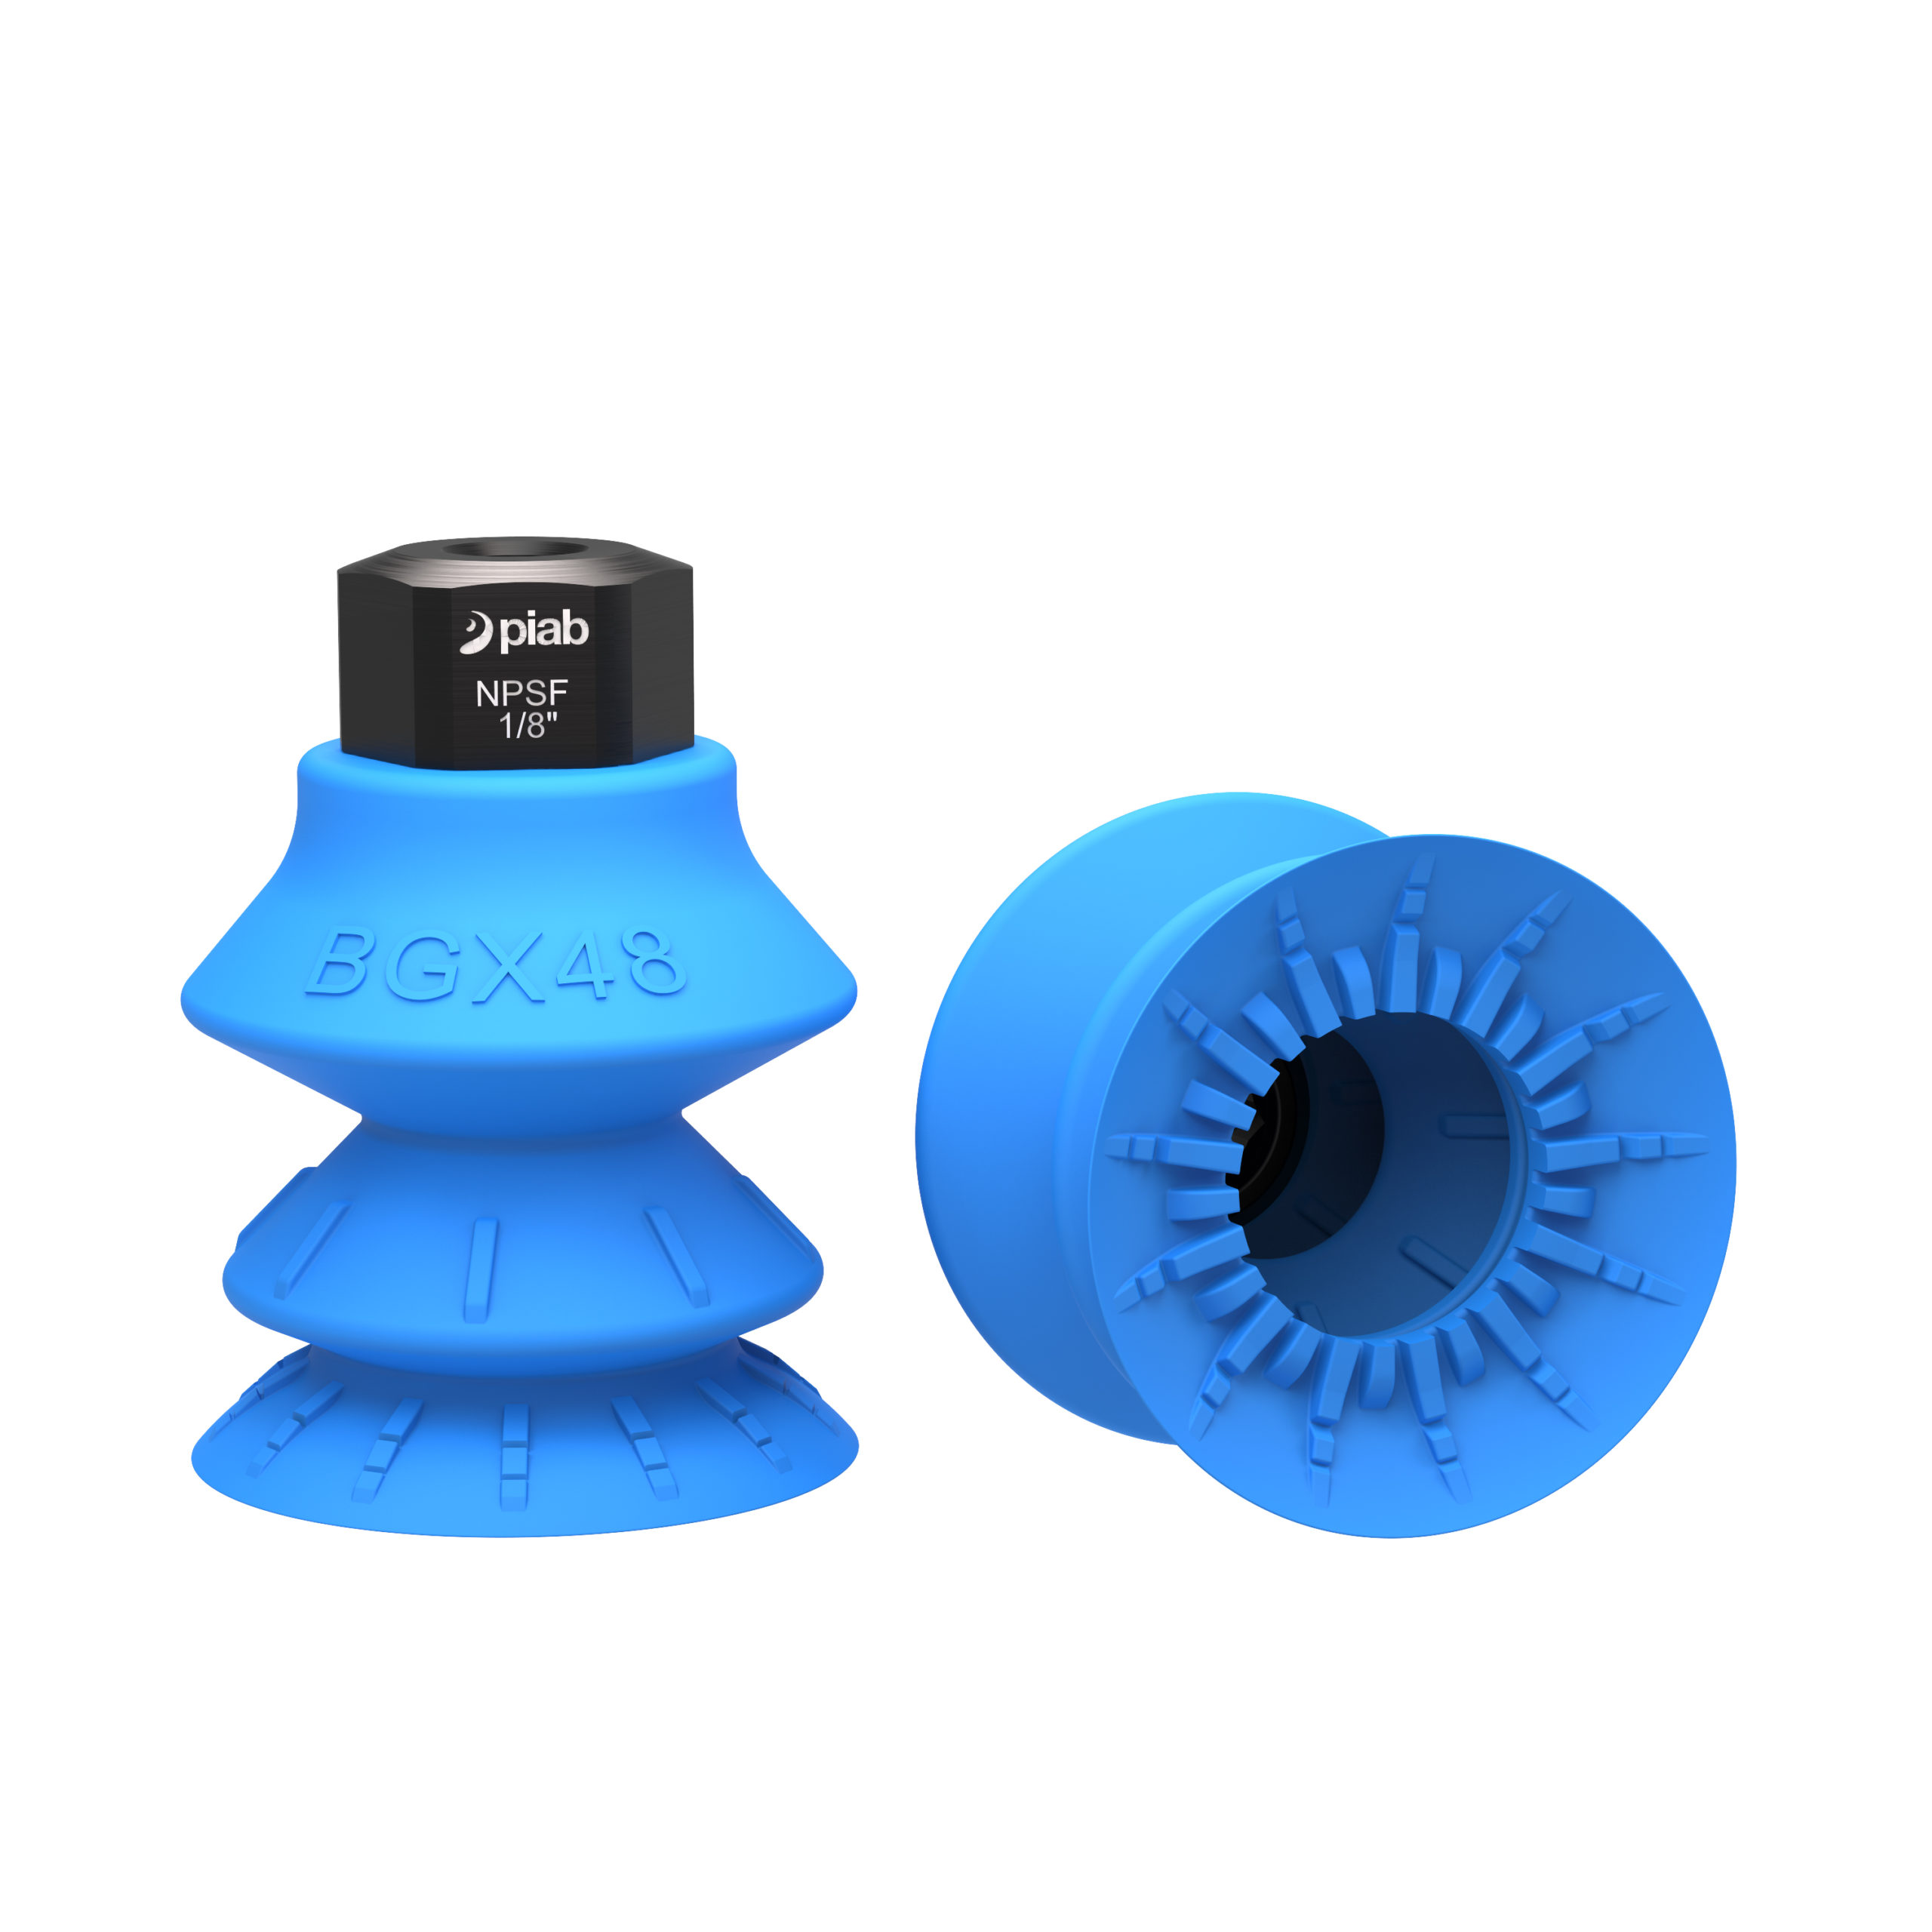 BGX suction cups image